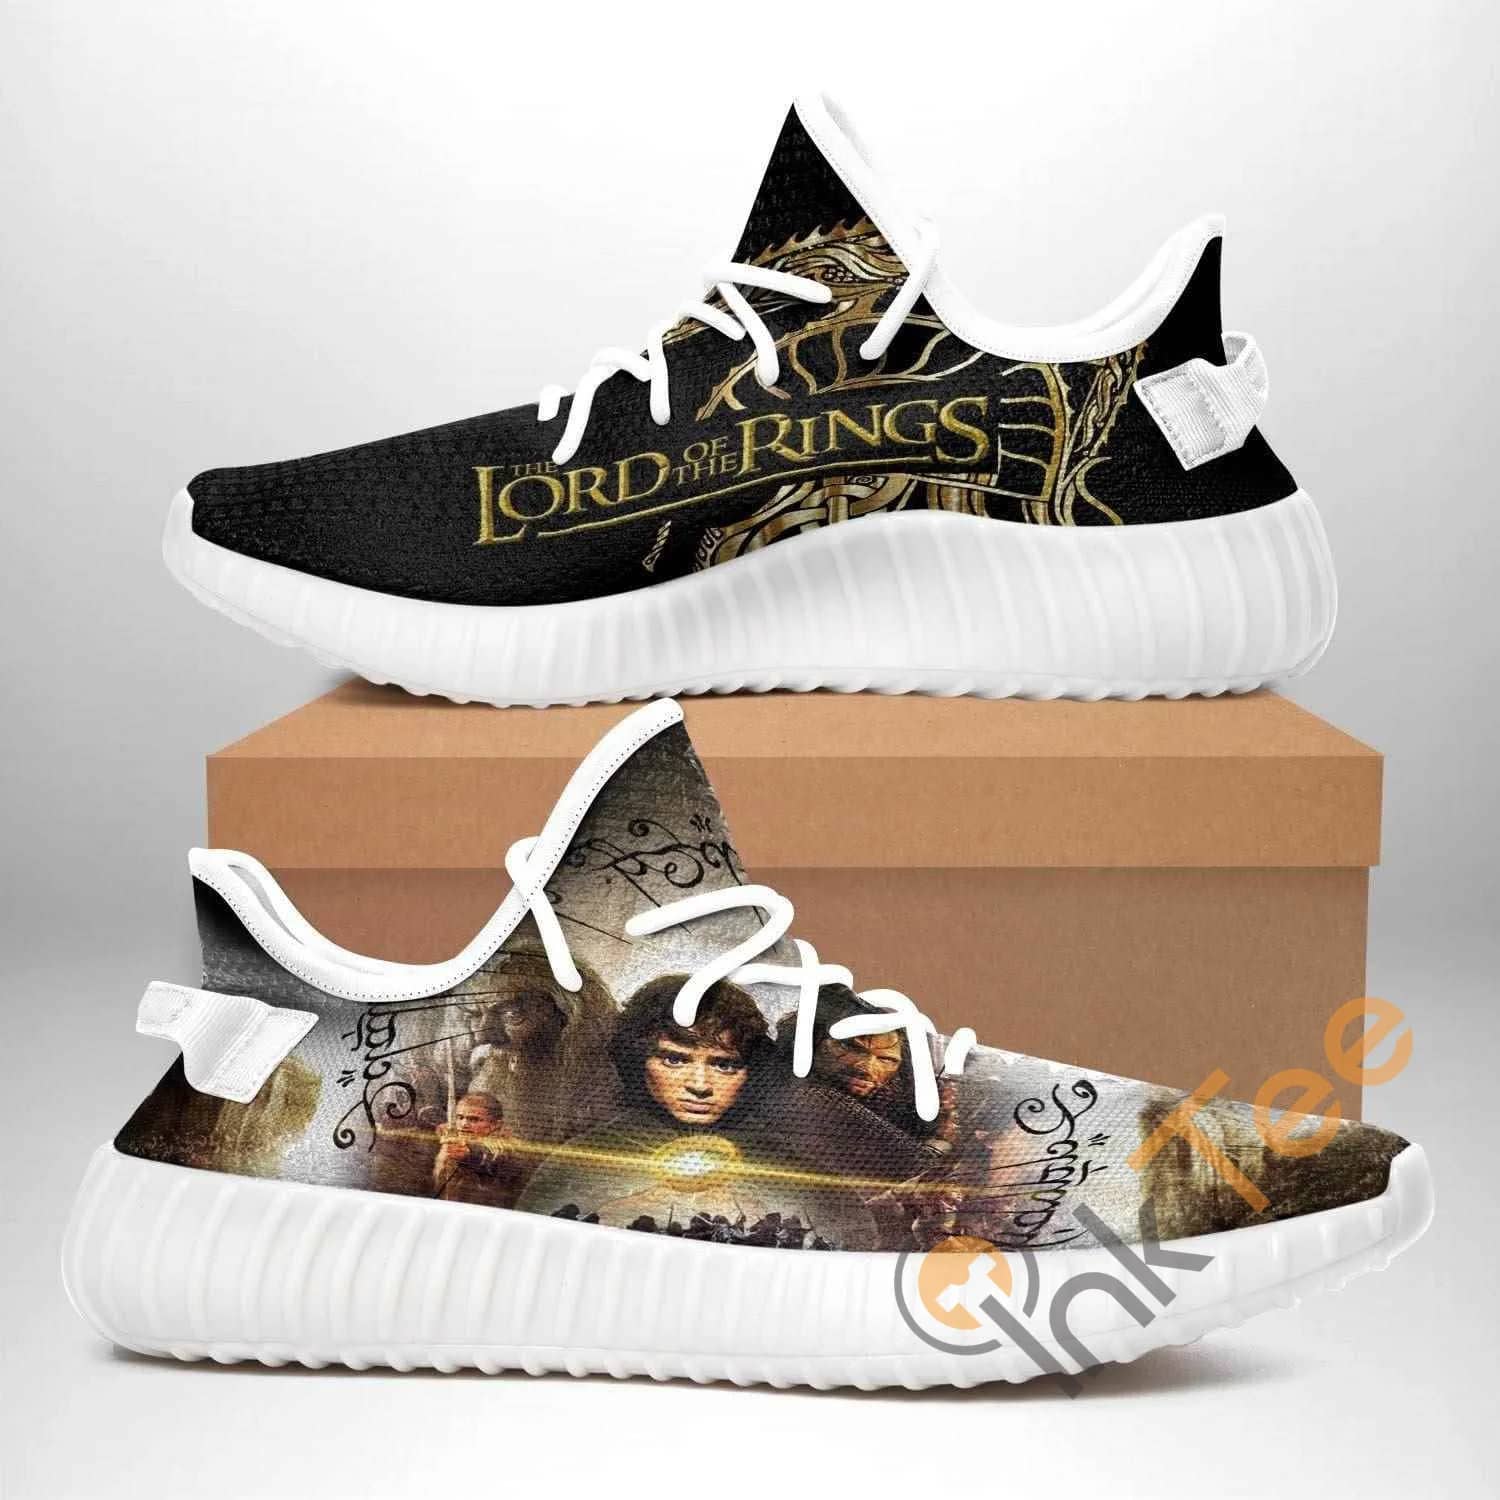 Louis Vuitton White Black Yeezy Boost Shoes Sport Sneakers Best Lv For Men  Women - Macall Cloth Store - Destination for fashionistas